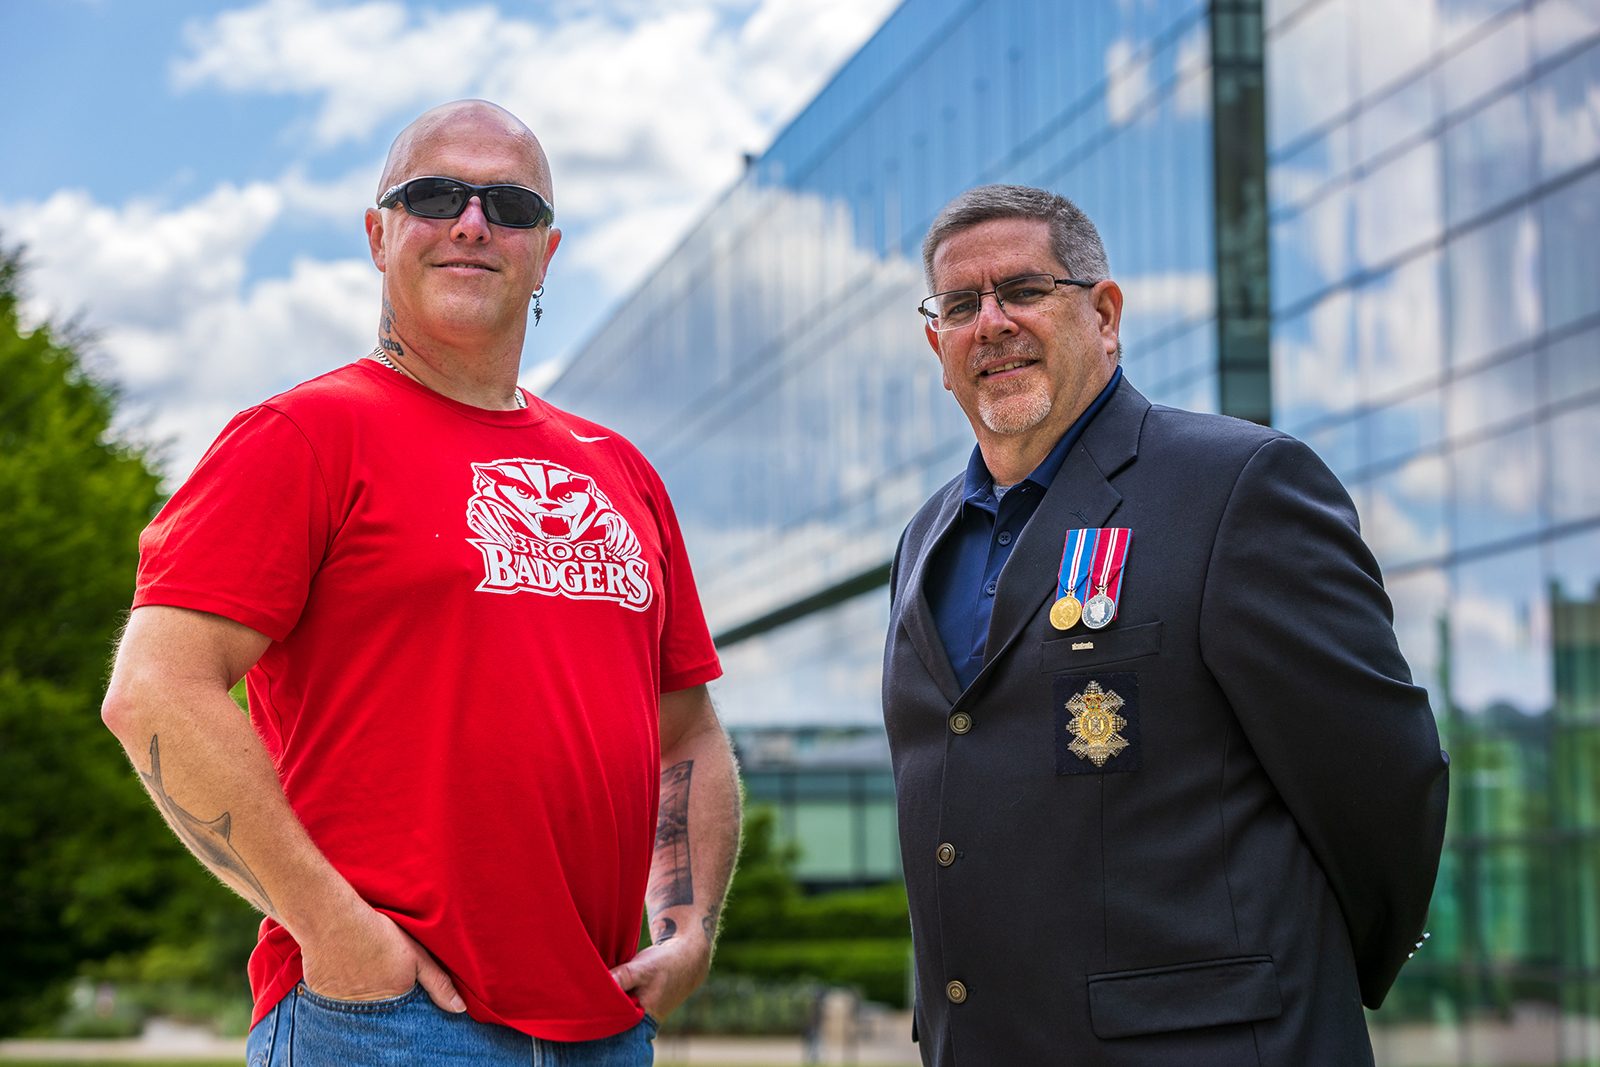 Two men stand outside next to each other in front of a large glass building. The man to the left is wearing a red Brock Badgers T-shirt and sunglasses. The man to the right is wearing a navy suit jacket displaying military medals.